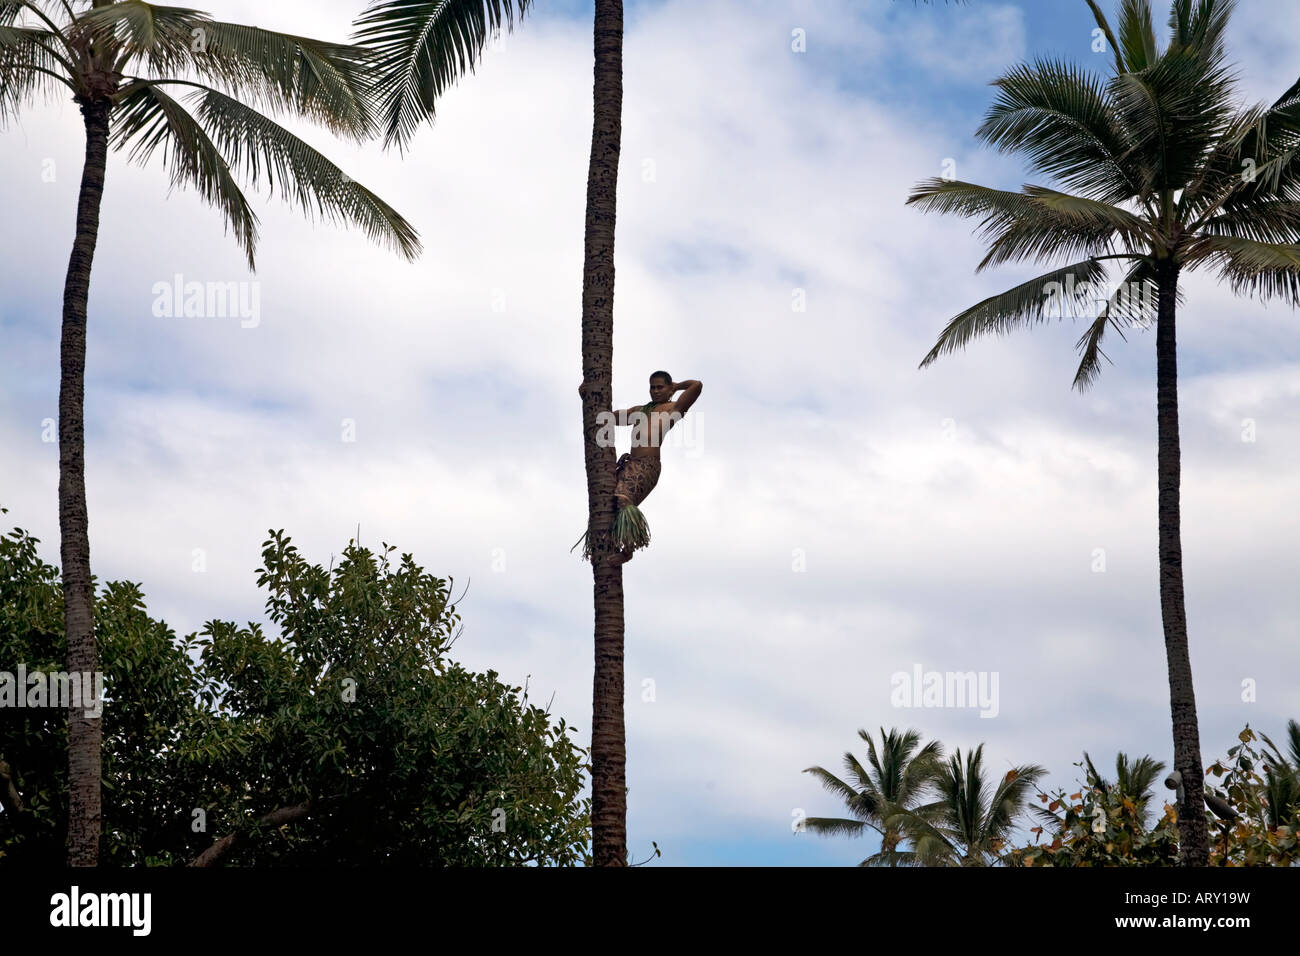 Native climbing palm tree in Hawaii. Tall thin palm trees with white cloud and blue skies. Stock Photo